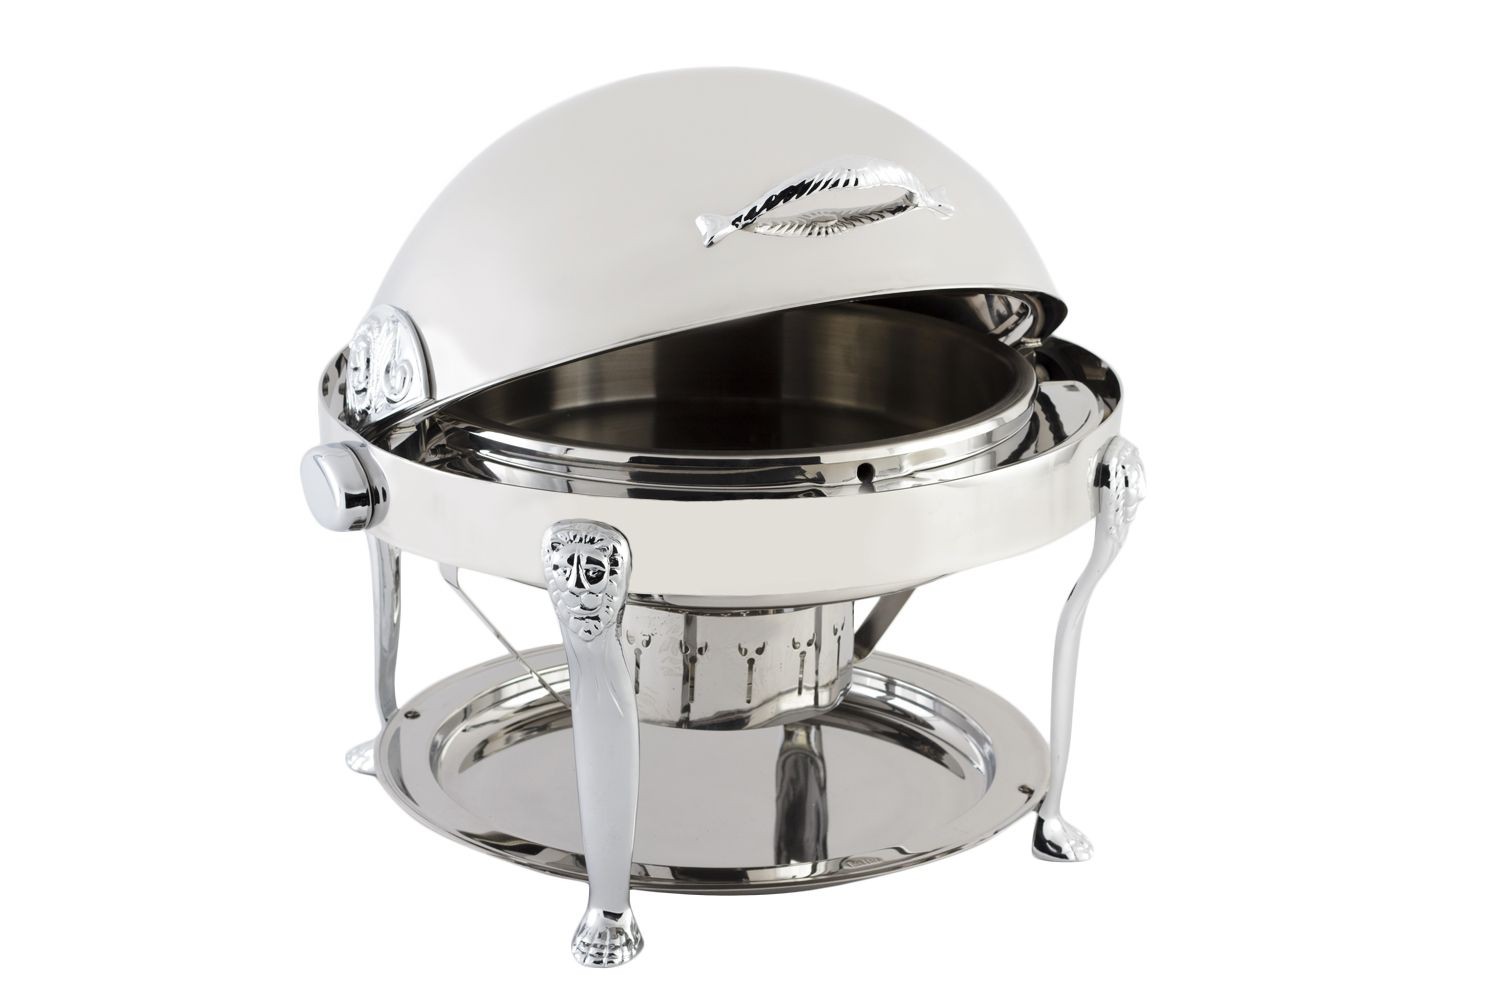 Bon Chef 18000CH Elite Dripless Round Chafer with Chrome Accents, Lion Legs, 8 Qt.